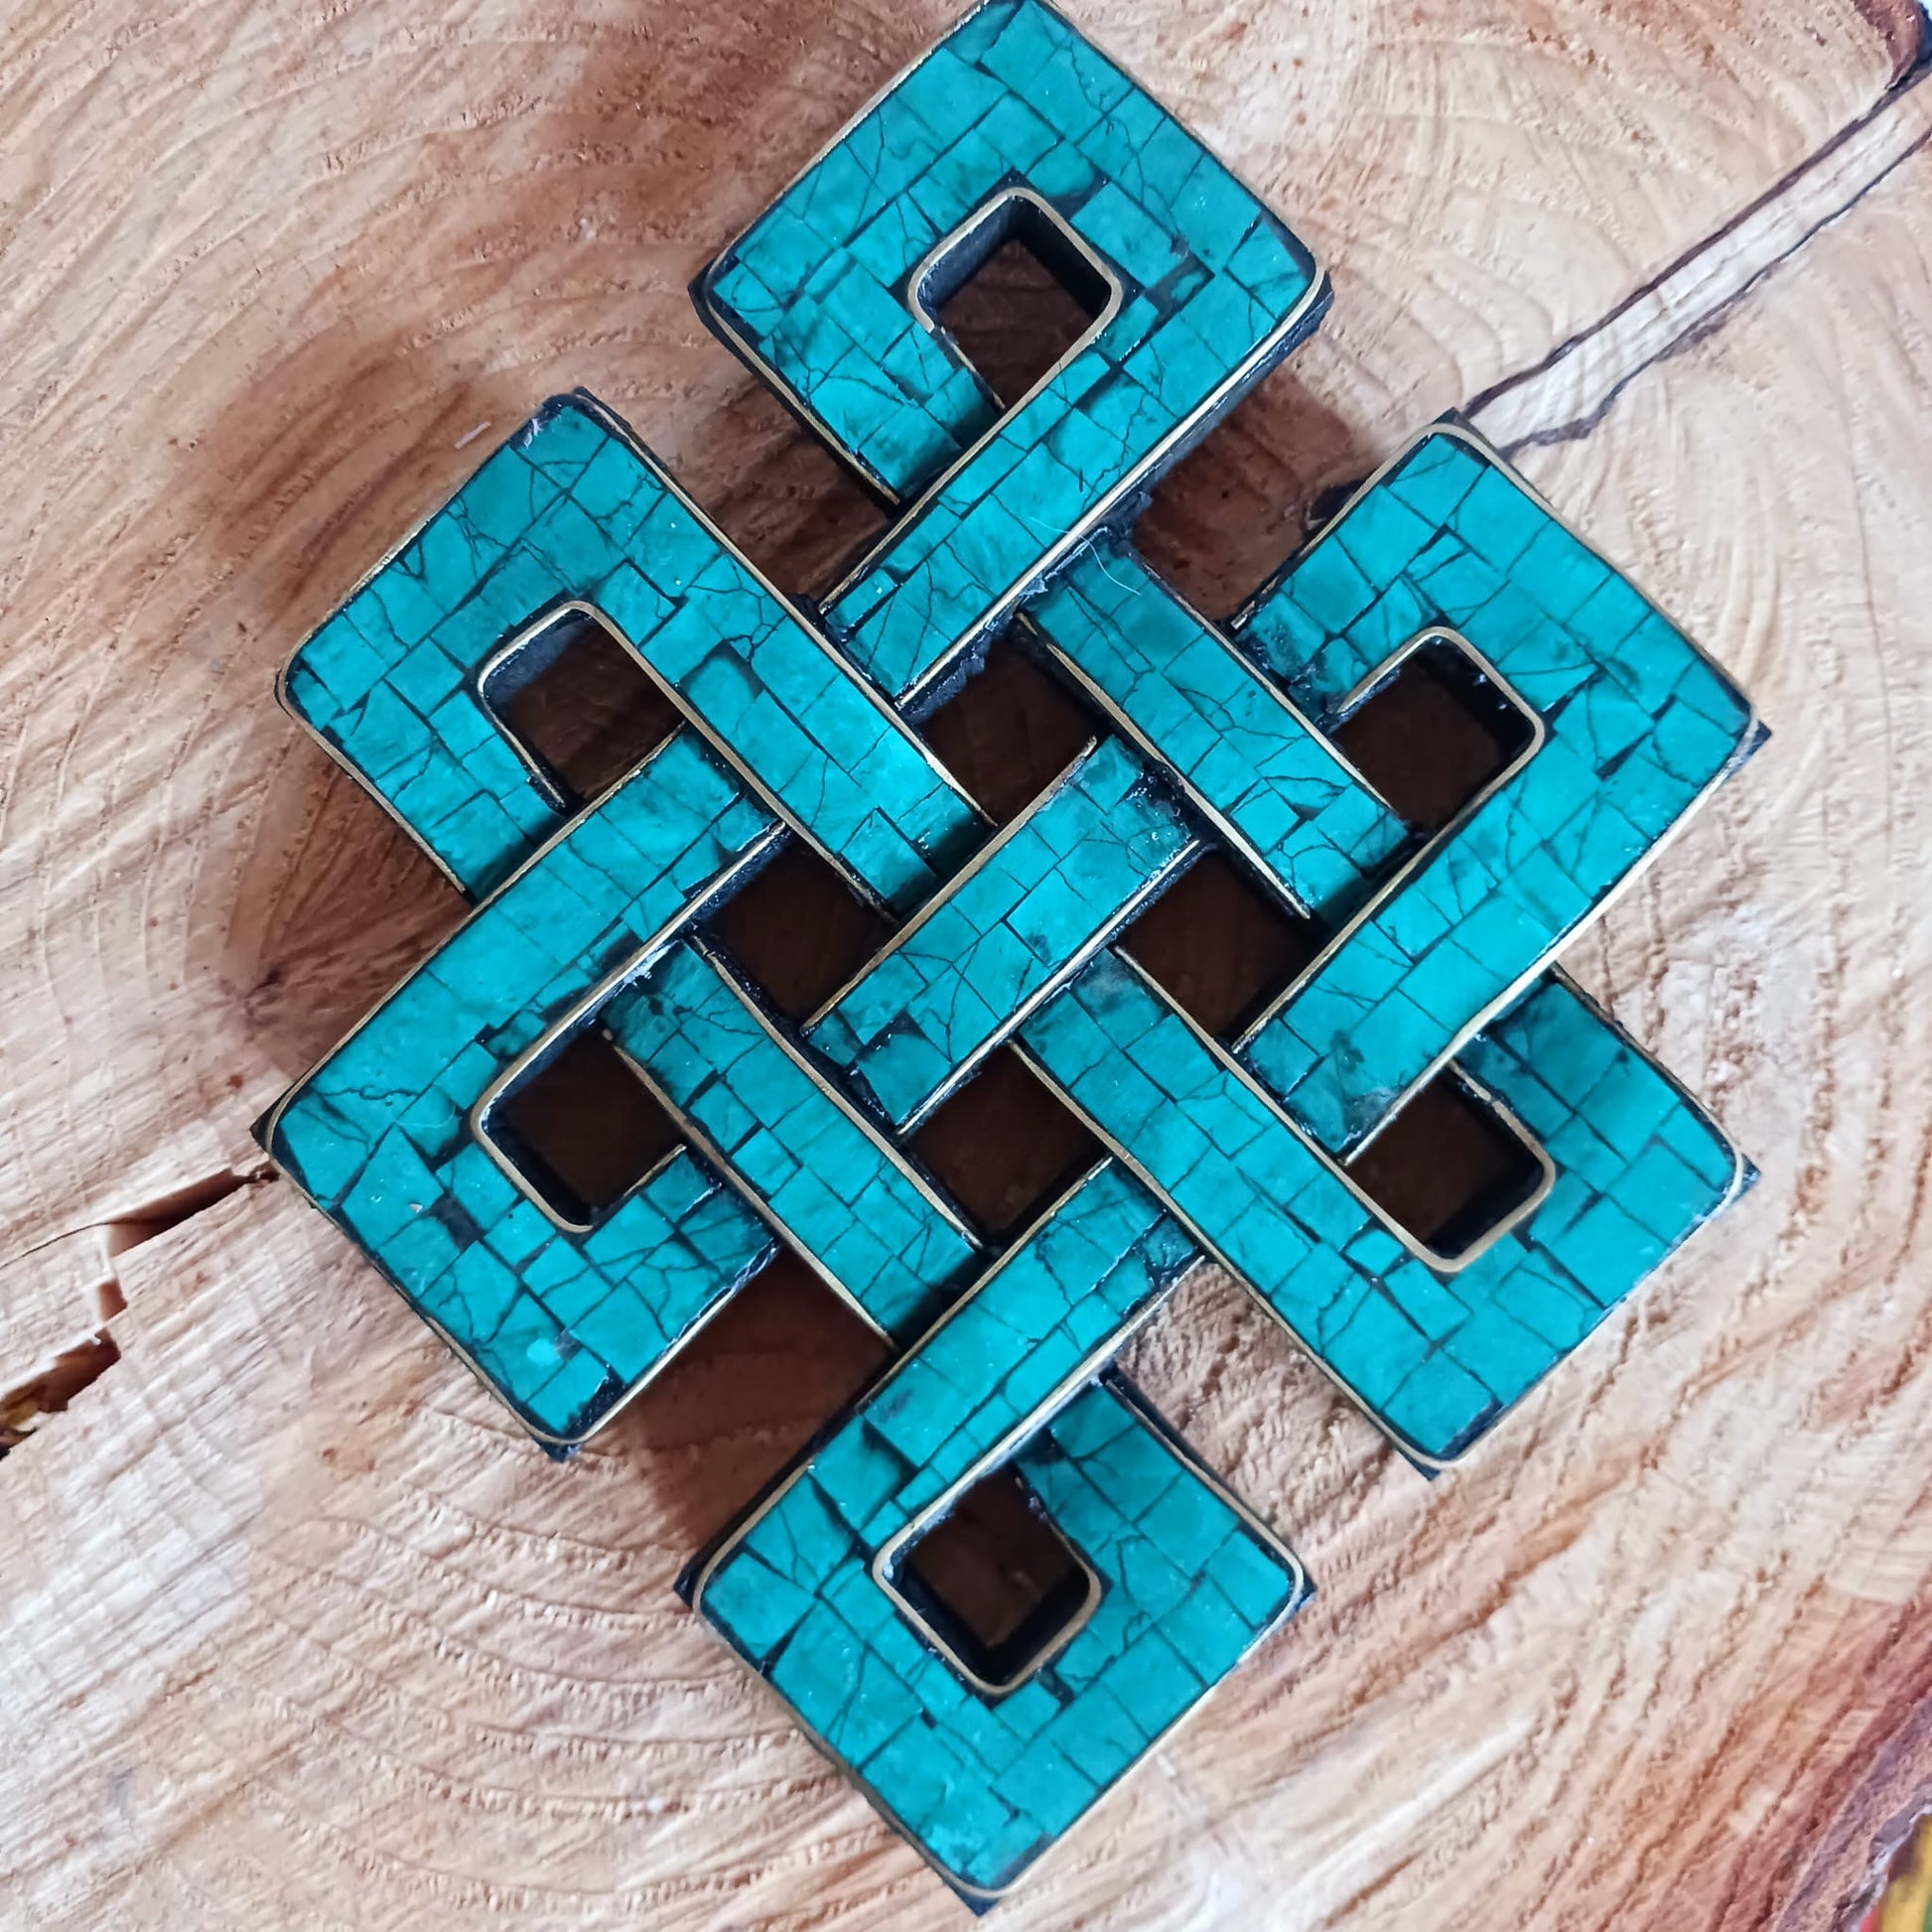 Tibetan Turquoise decorated Endless Knot wooden wall décor 19 X 15 cm